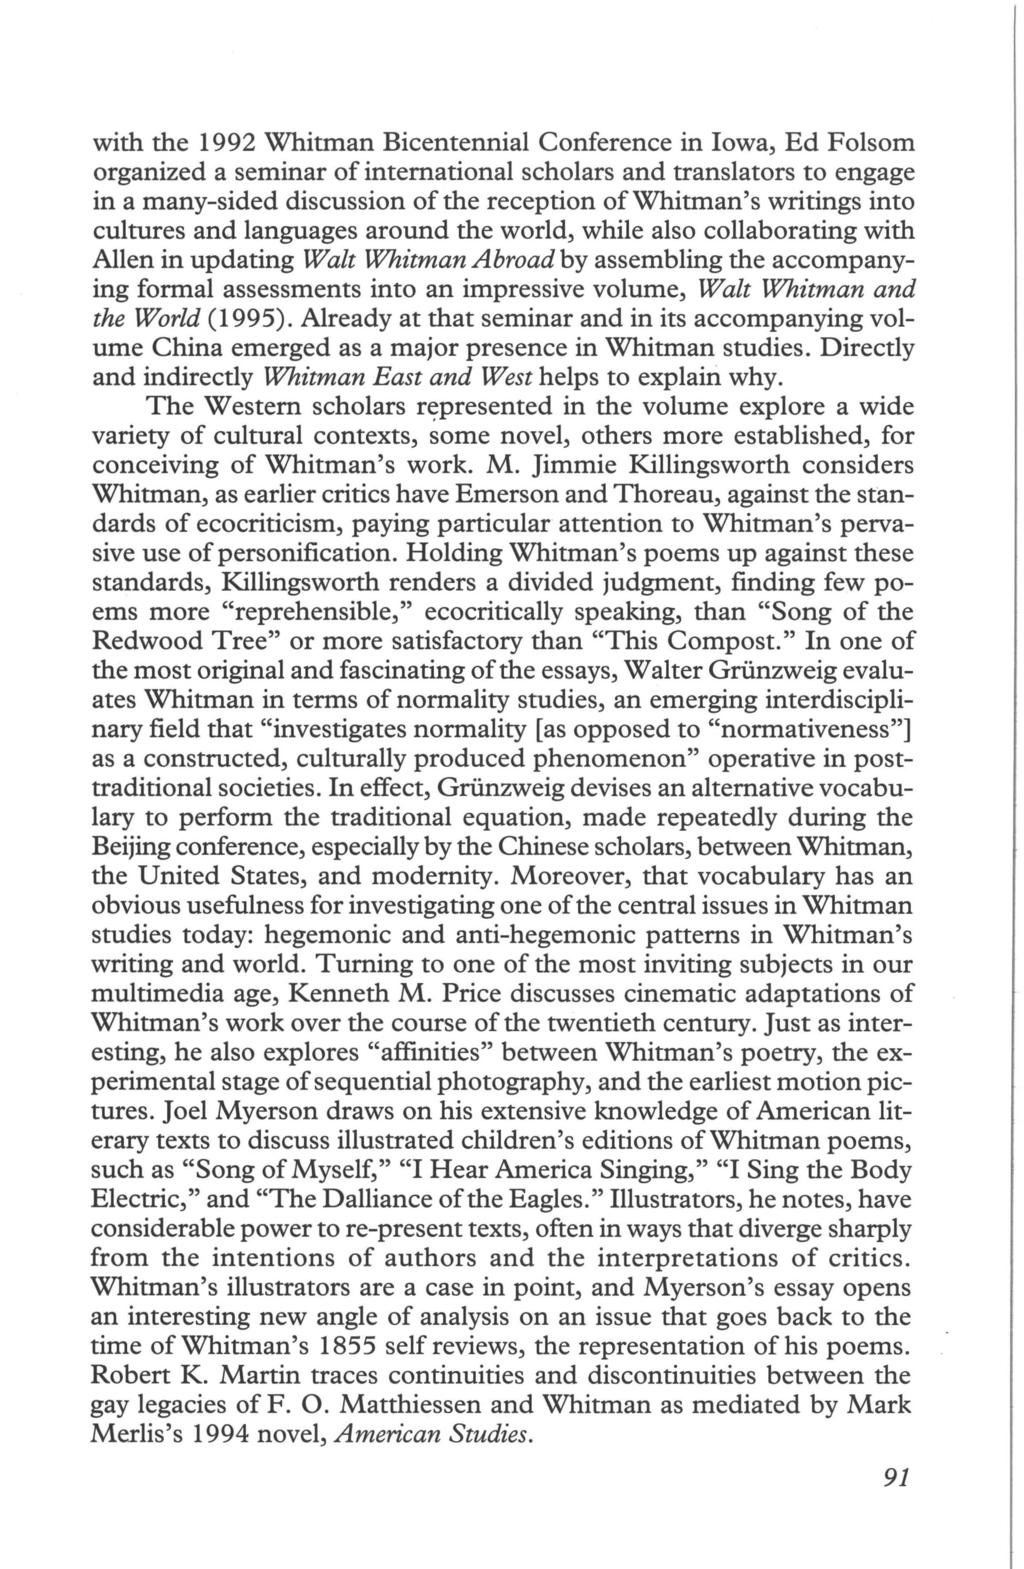 with the 1992 Whitman Bicentennial Conference in Iowa, Ed Folsom organized a seminar of international scholars and translators to engage in a many-sided discussion of the reception of Whitman's